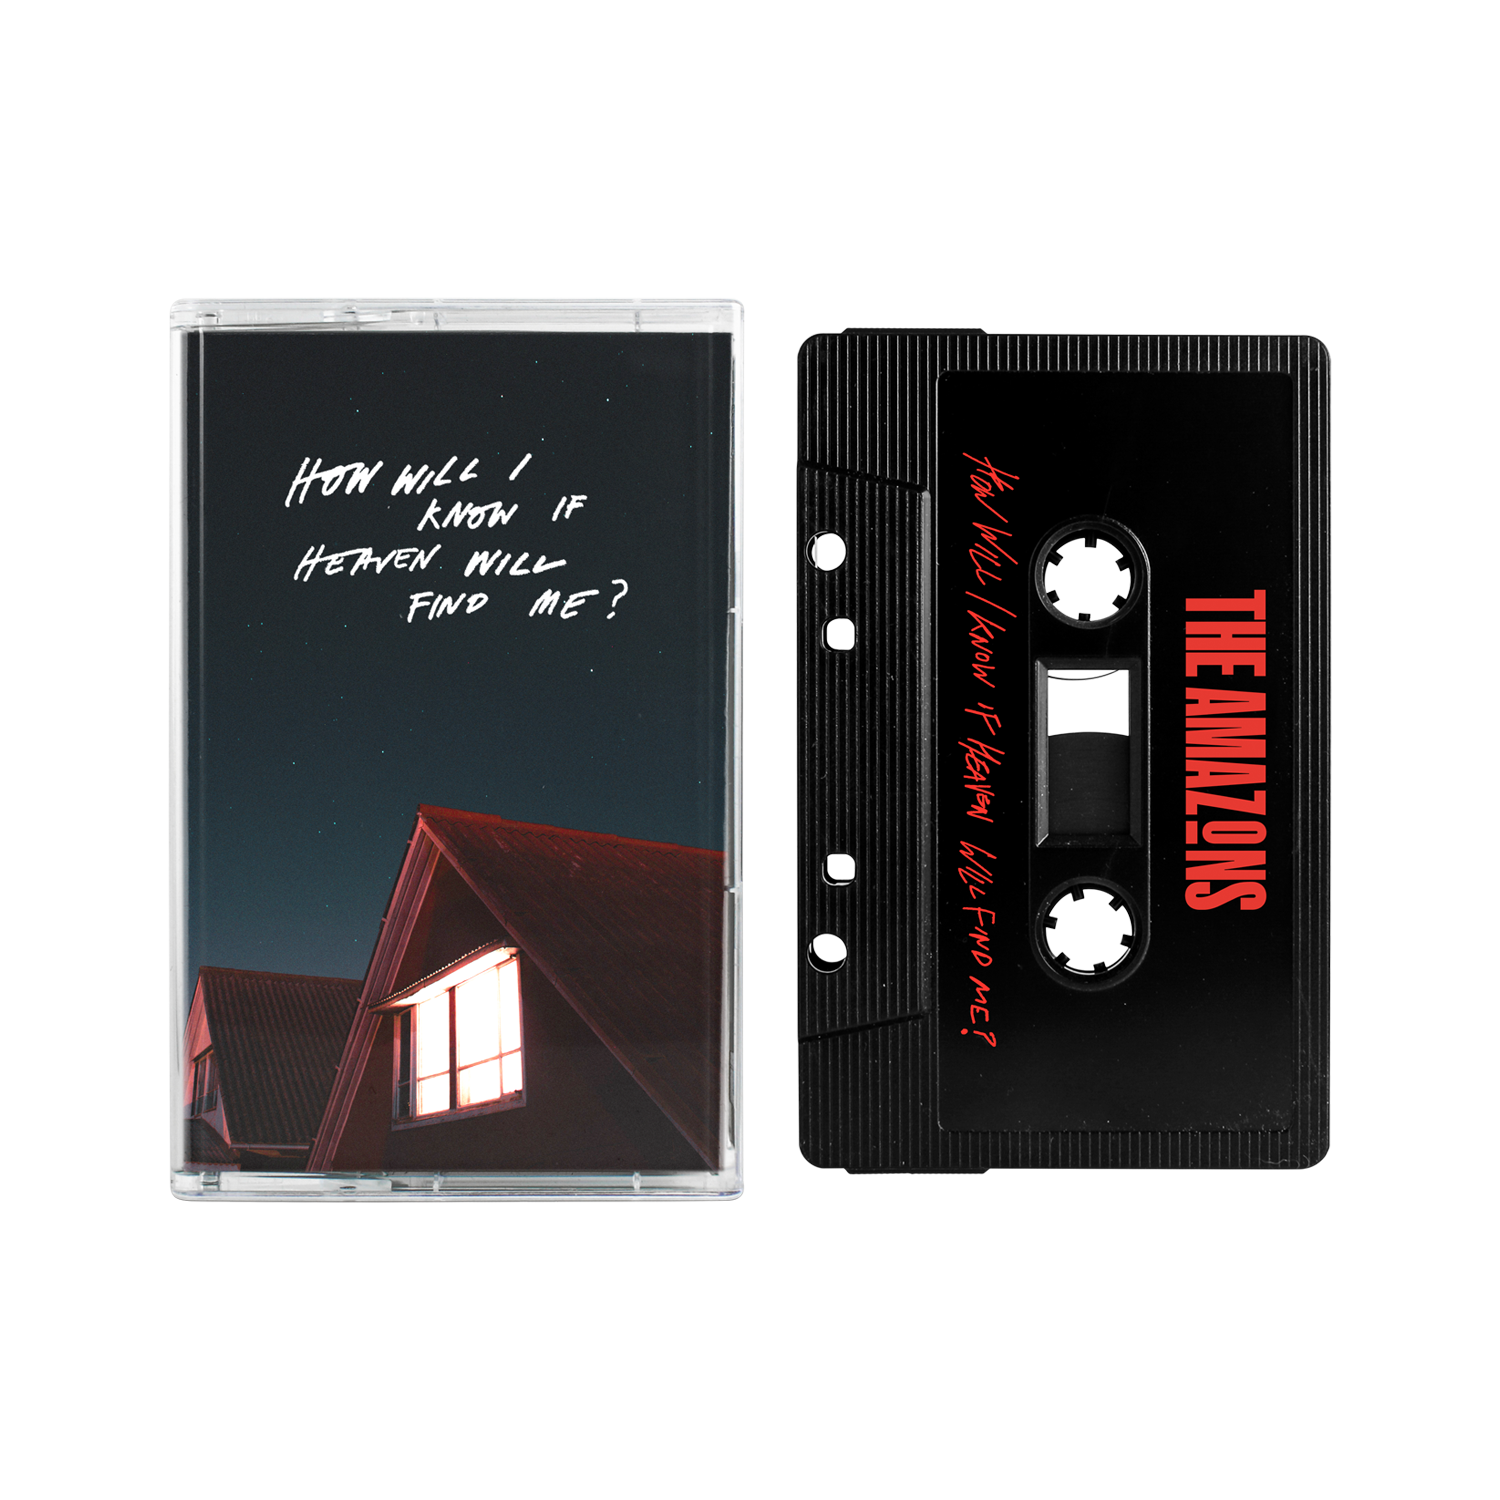 The Amazons - How Will I Know If Heaven Will Find Me?: Cassette